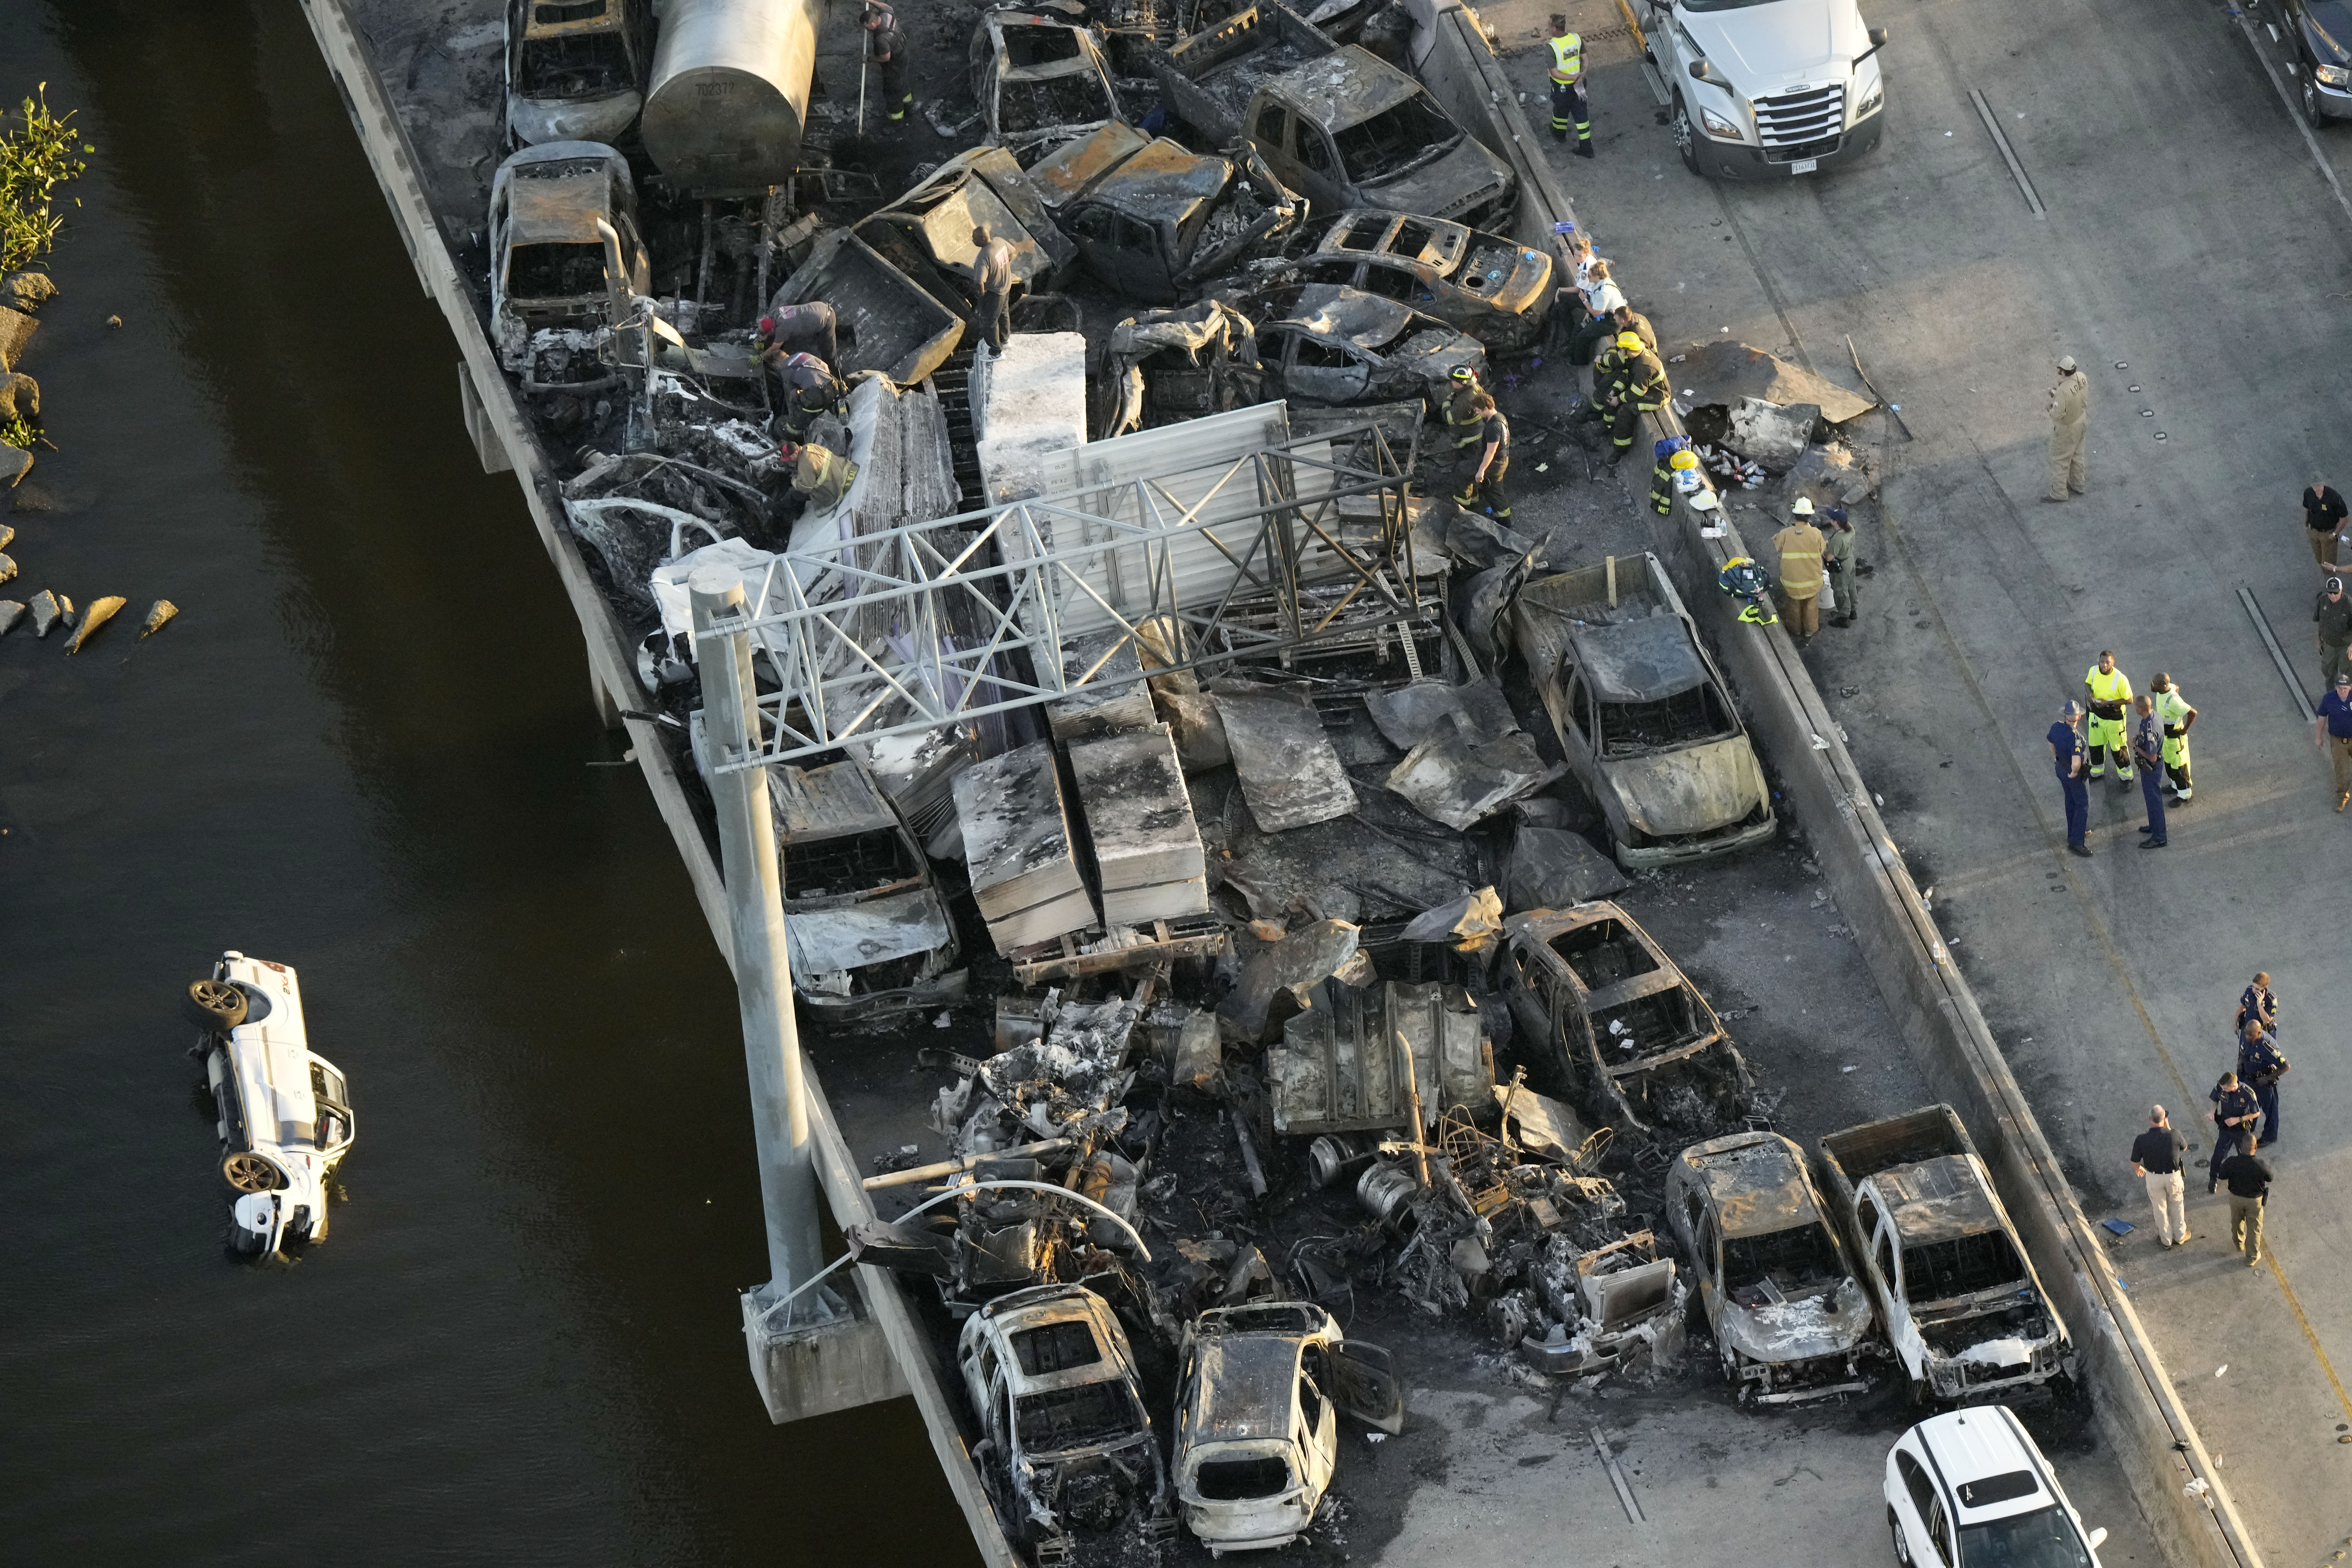 In this aerial photo, responders are seen near wreckage in the aftermath of a multi-vehicle pileup ...